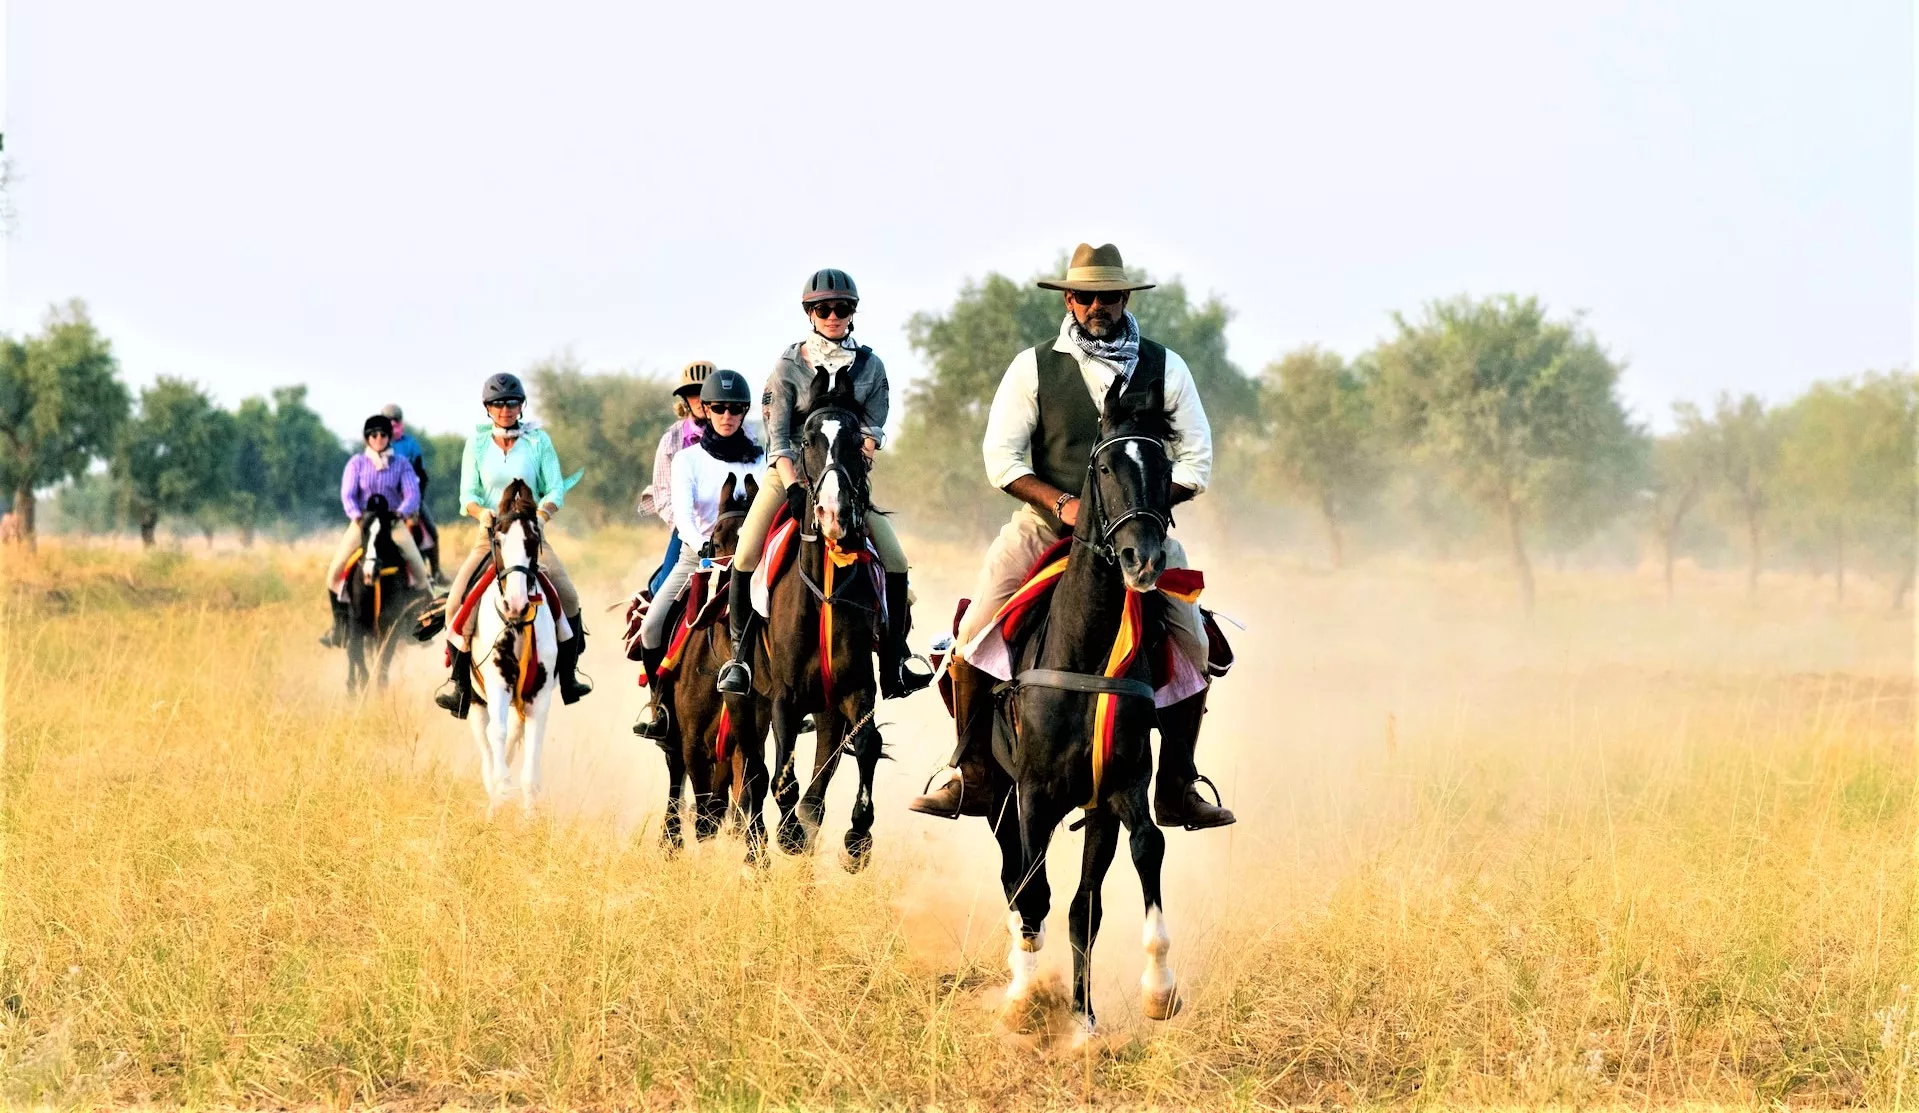 Saddle Horse Riding Academy in India, Central Asia | Horseback Riding - Rated 1.1